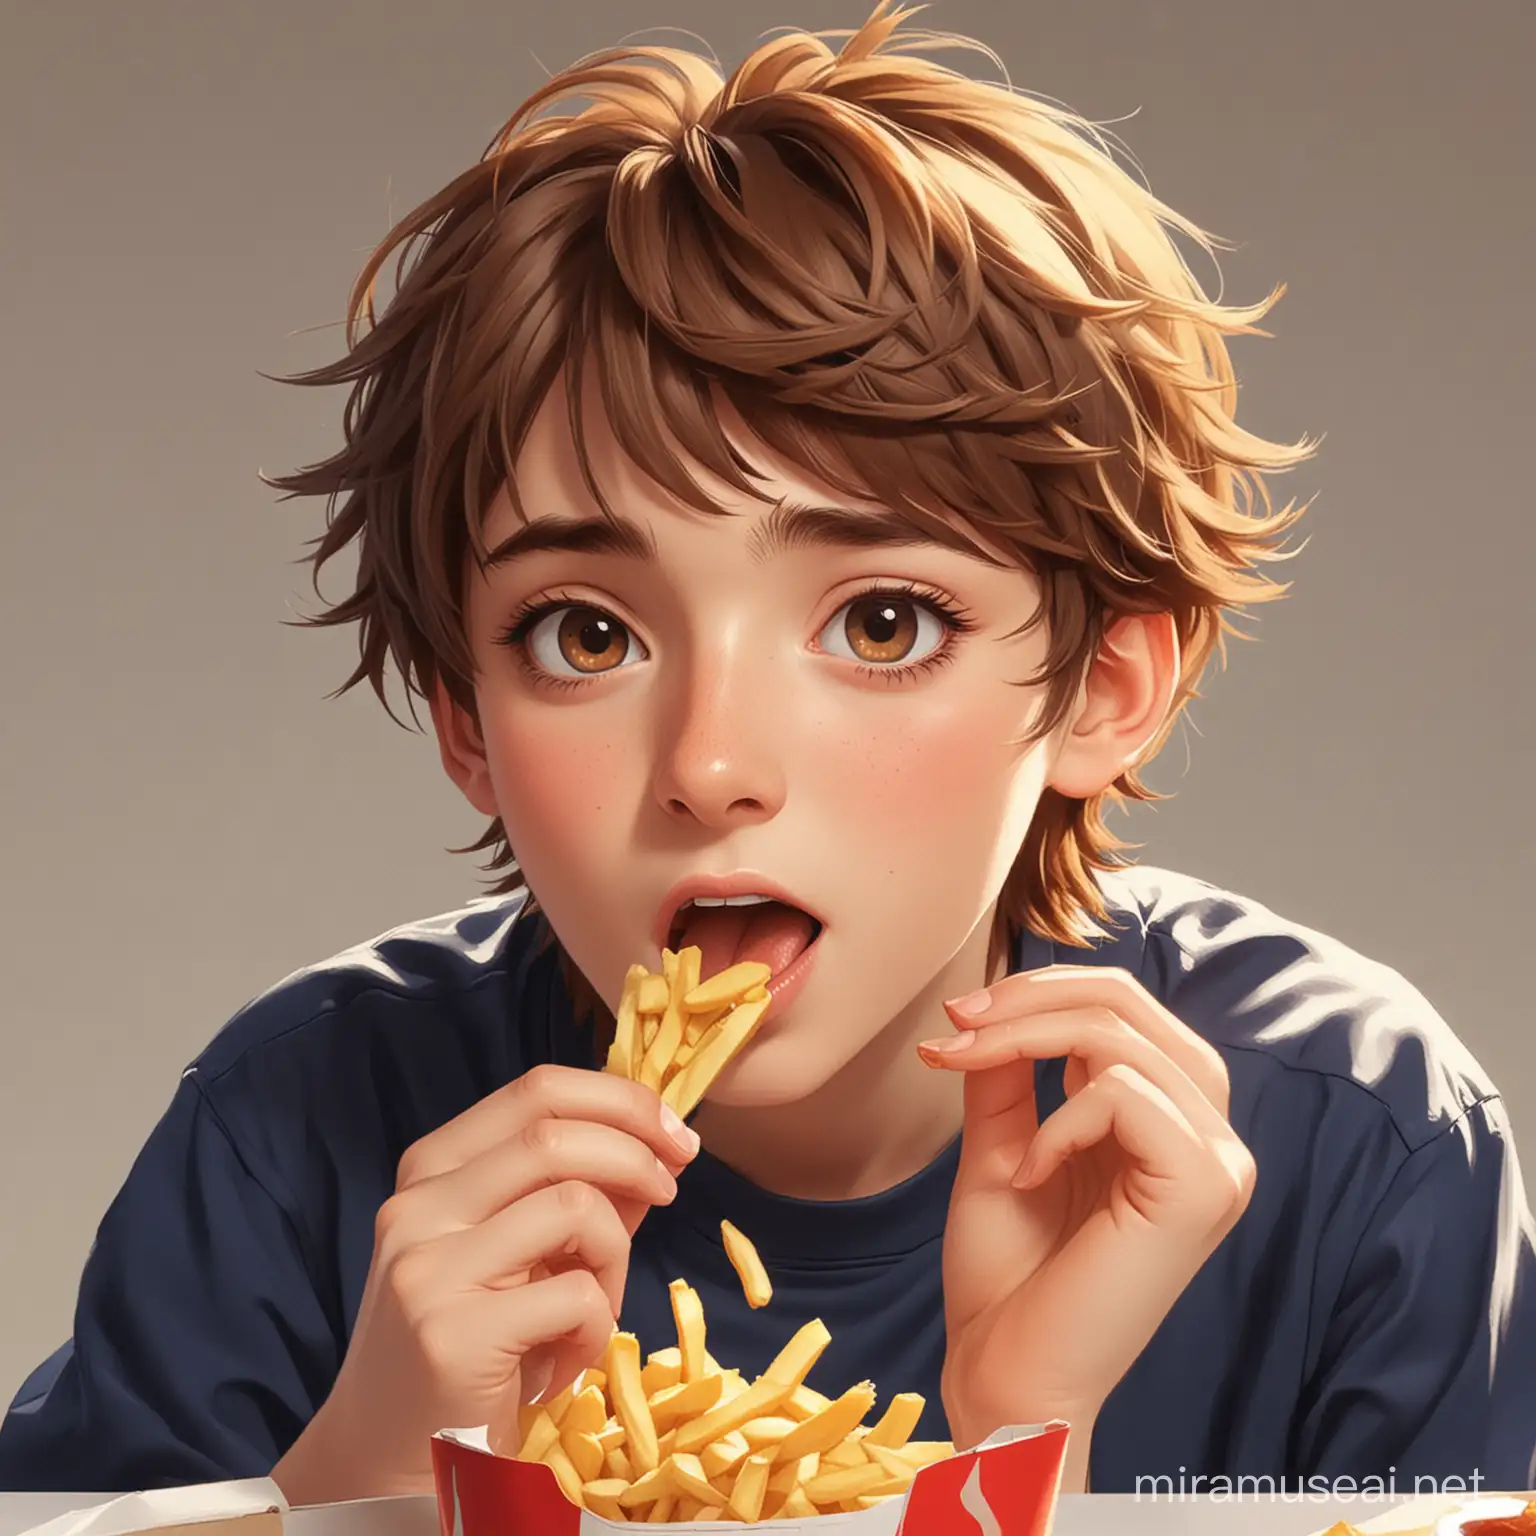 A brown haired boy eating french fries (animestyle) for reference
